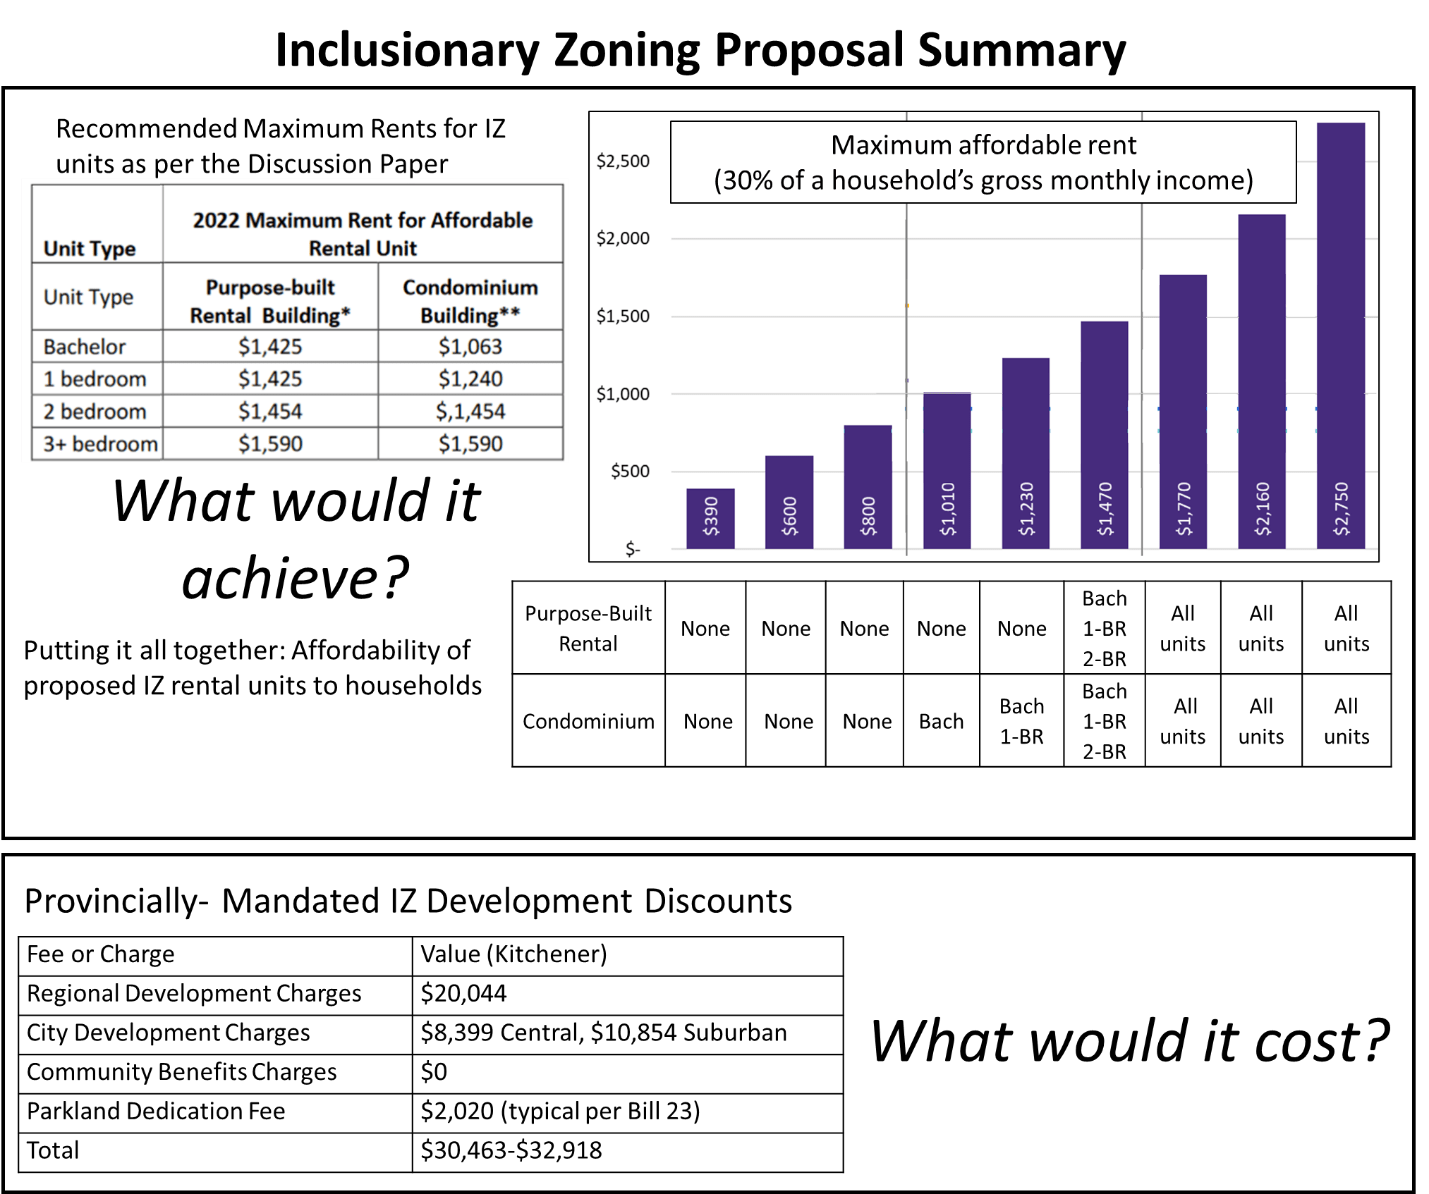 Summary of Inclusionary Zoning Proposal Discussion Paper